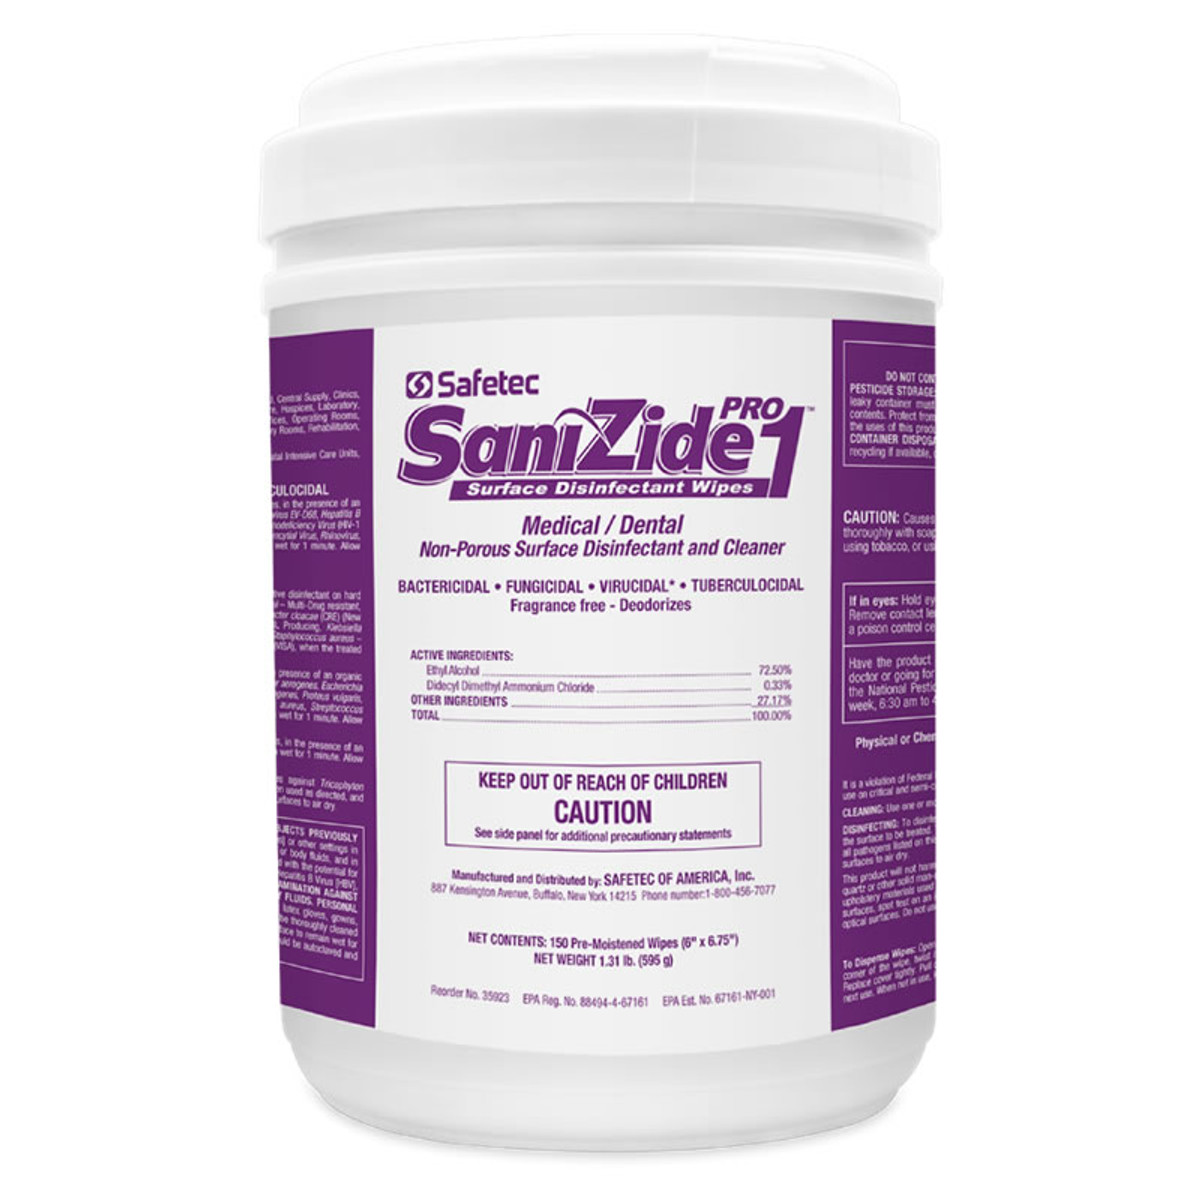 Safetec SaniZide Pro 1™ Surface Disinfectant Wipes - ROMI Medical